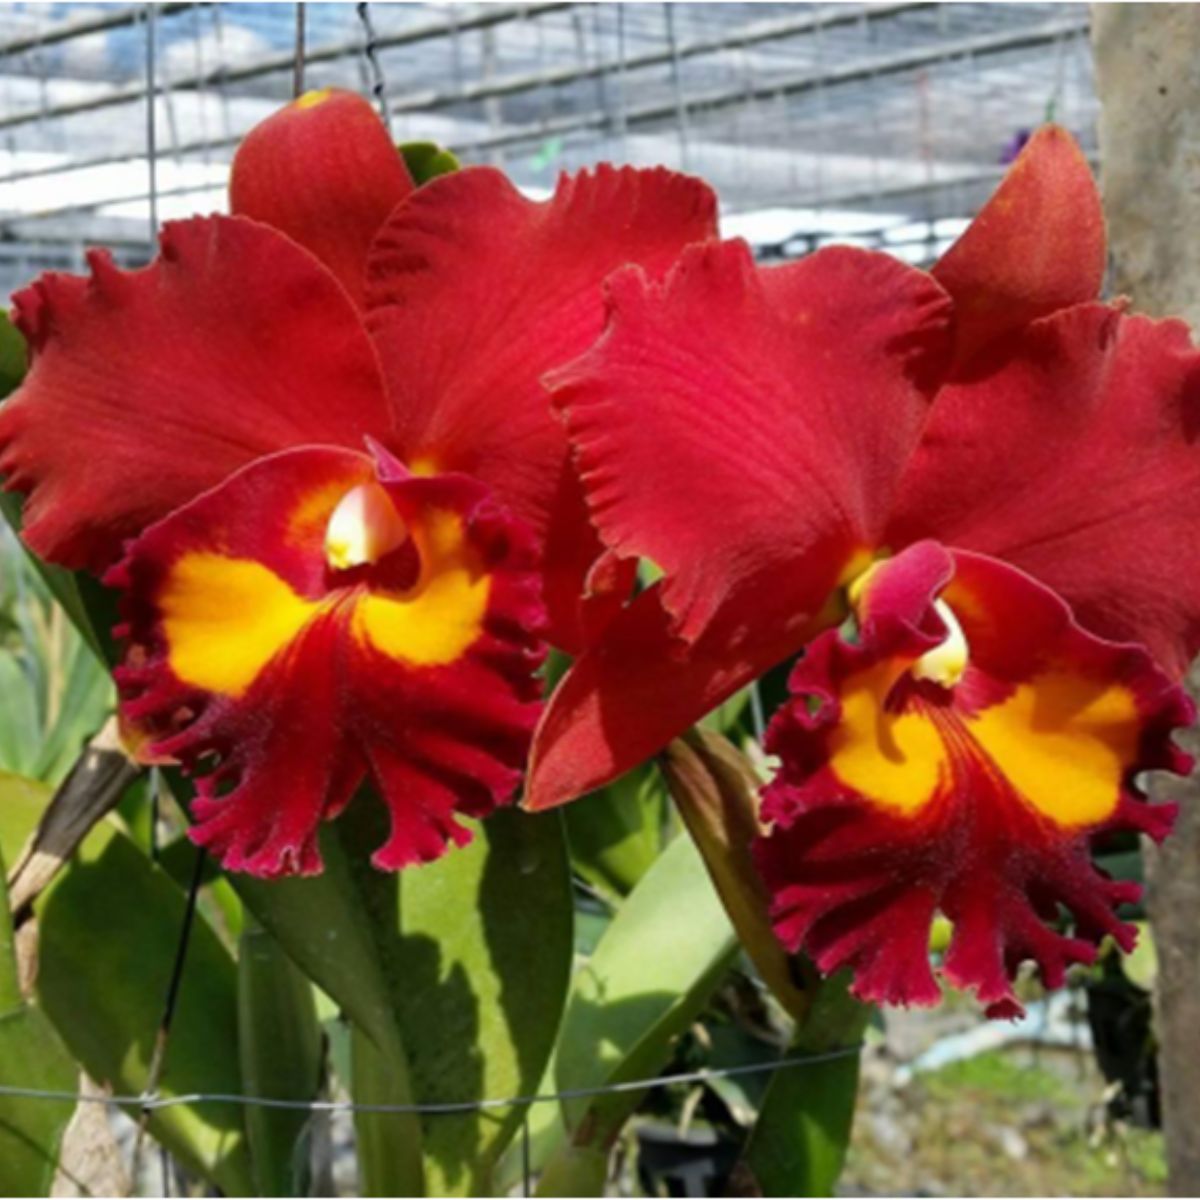 Rlc Samphran Gold Orchid - Stunning golden orchid with elegant blooms, radiating natural brilliance